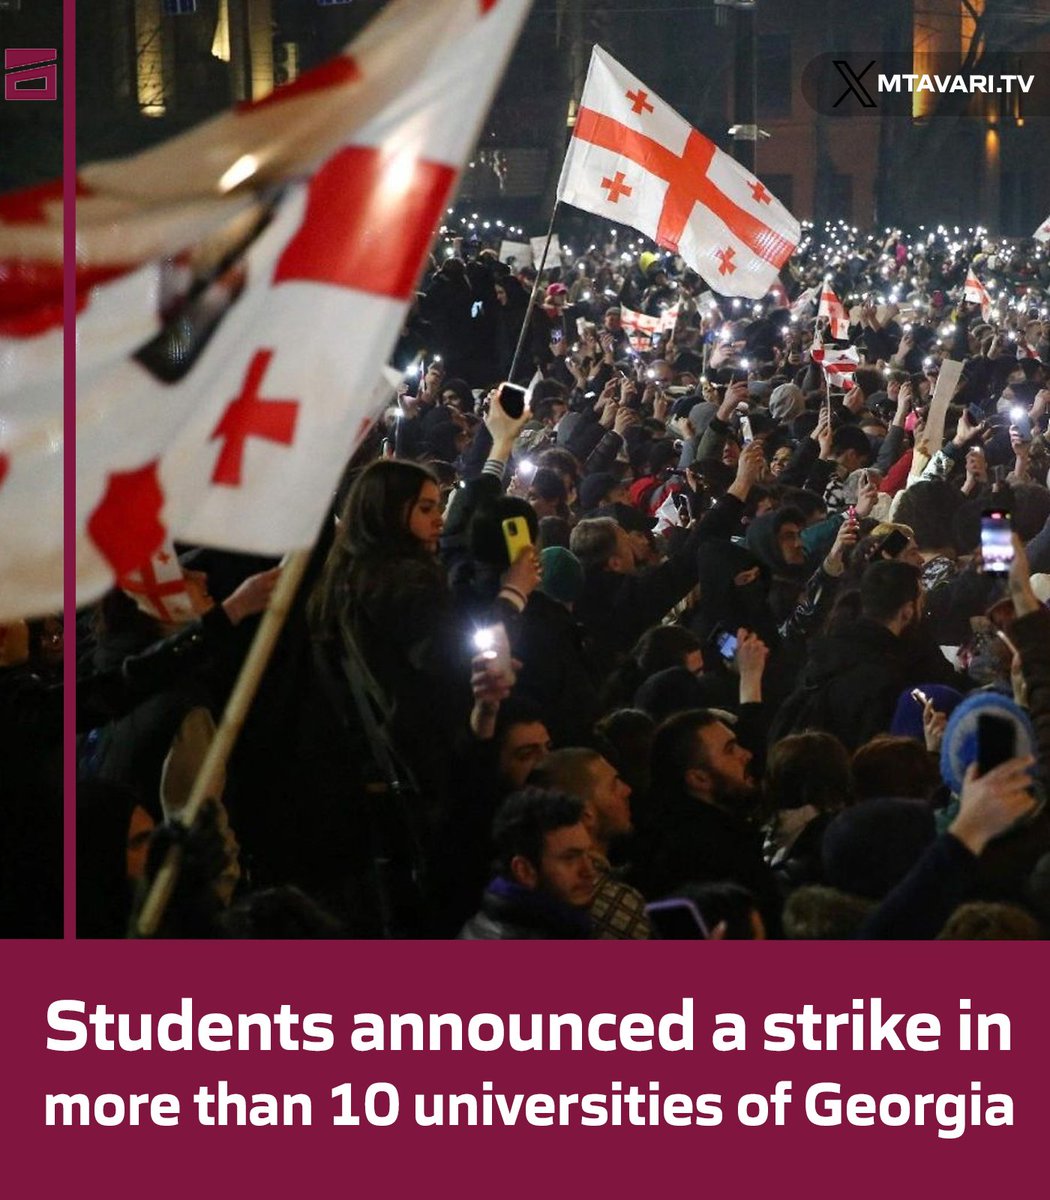 Students announced a strike in more than 10 universities of #Georgia. They are also supported by lecturers. Students and academic staff are protesting Russian law and repression. #NoToRussianLaw